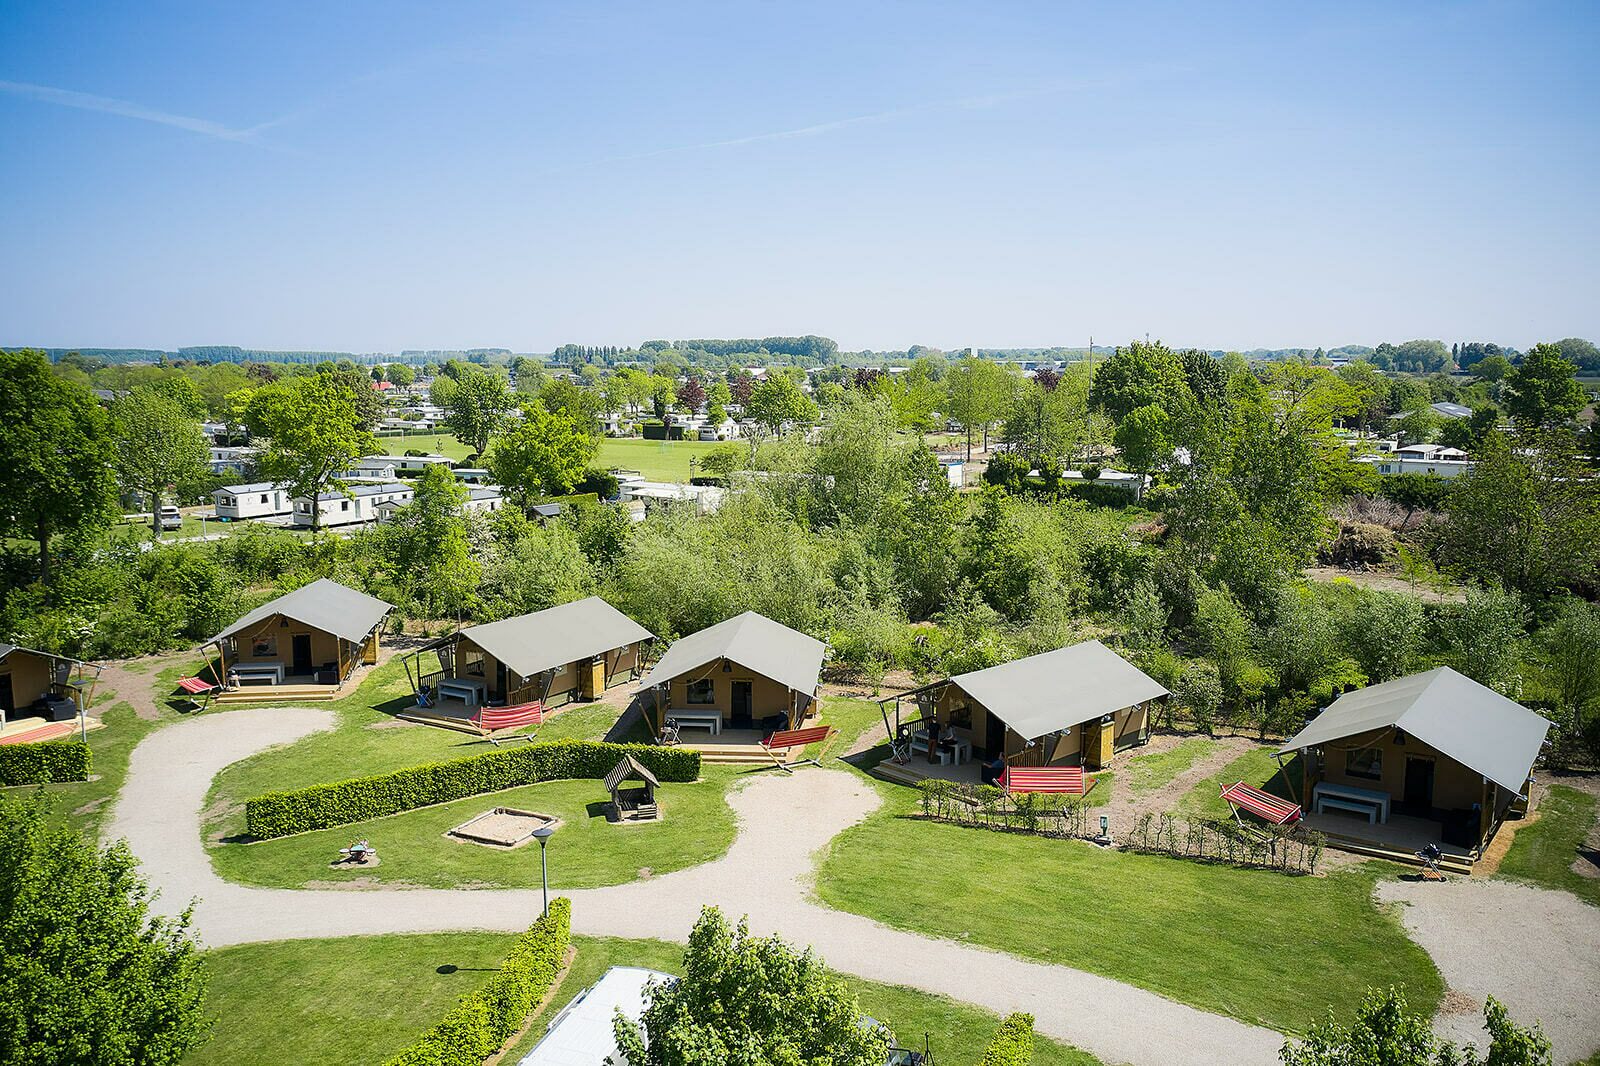 Camping Betuwestrand | Villatent Nomad | 4-6 Pers.